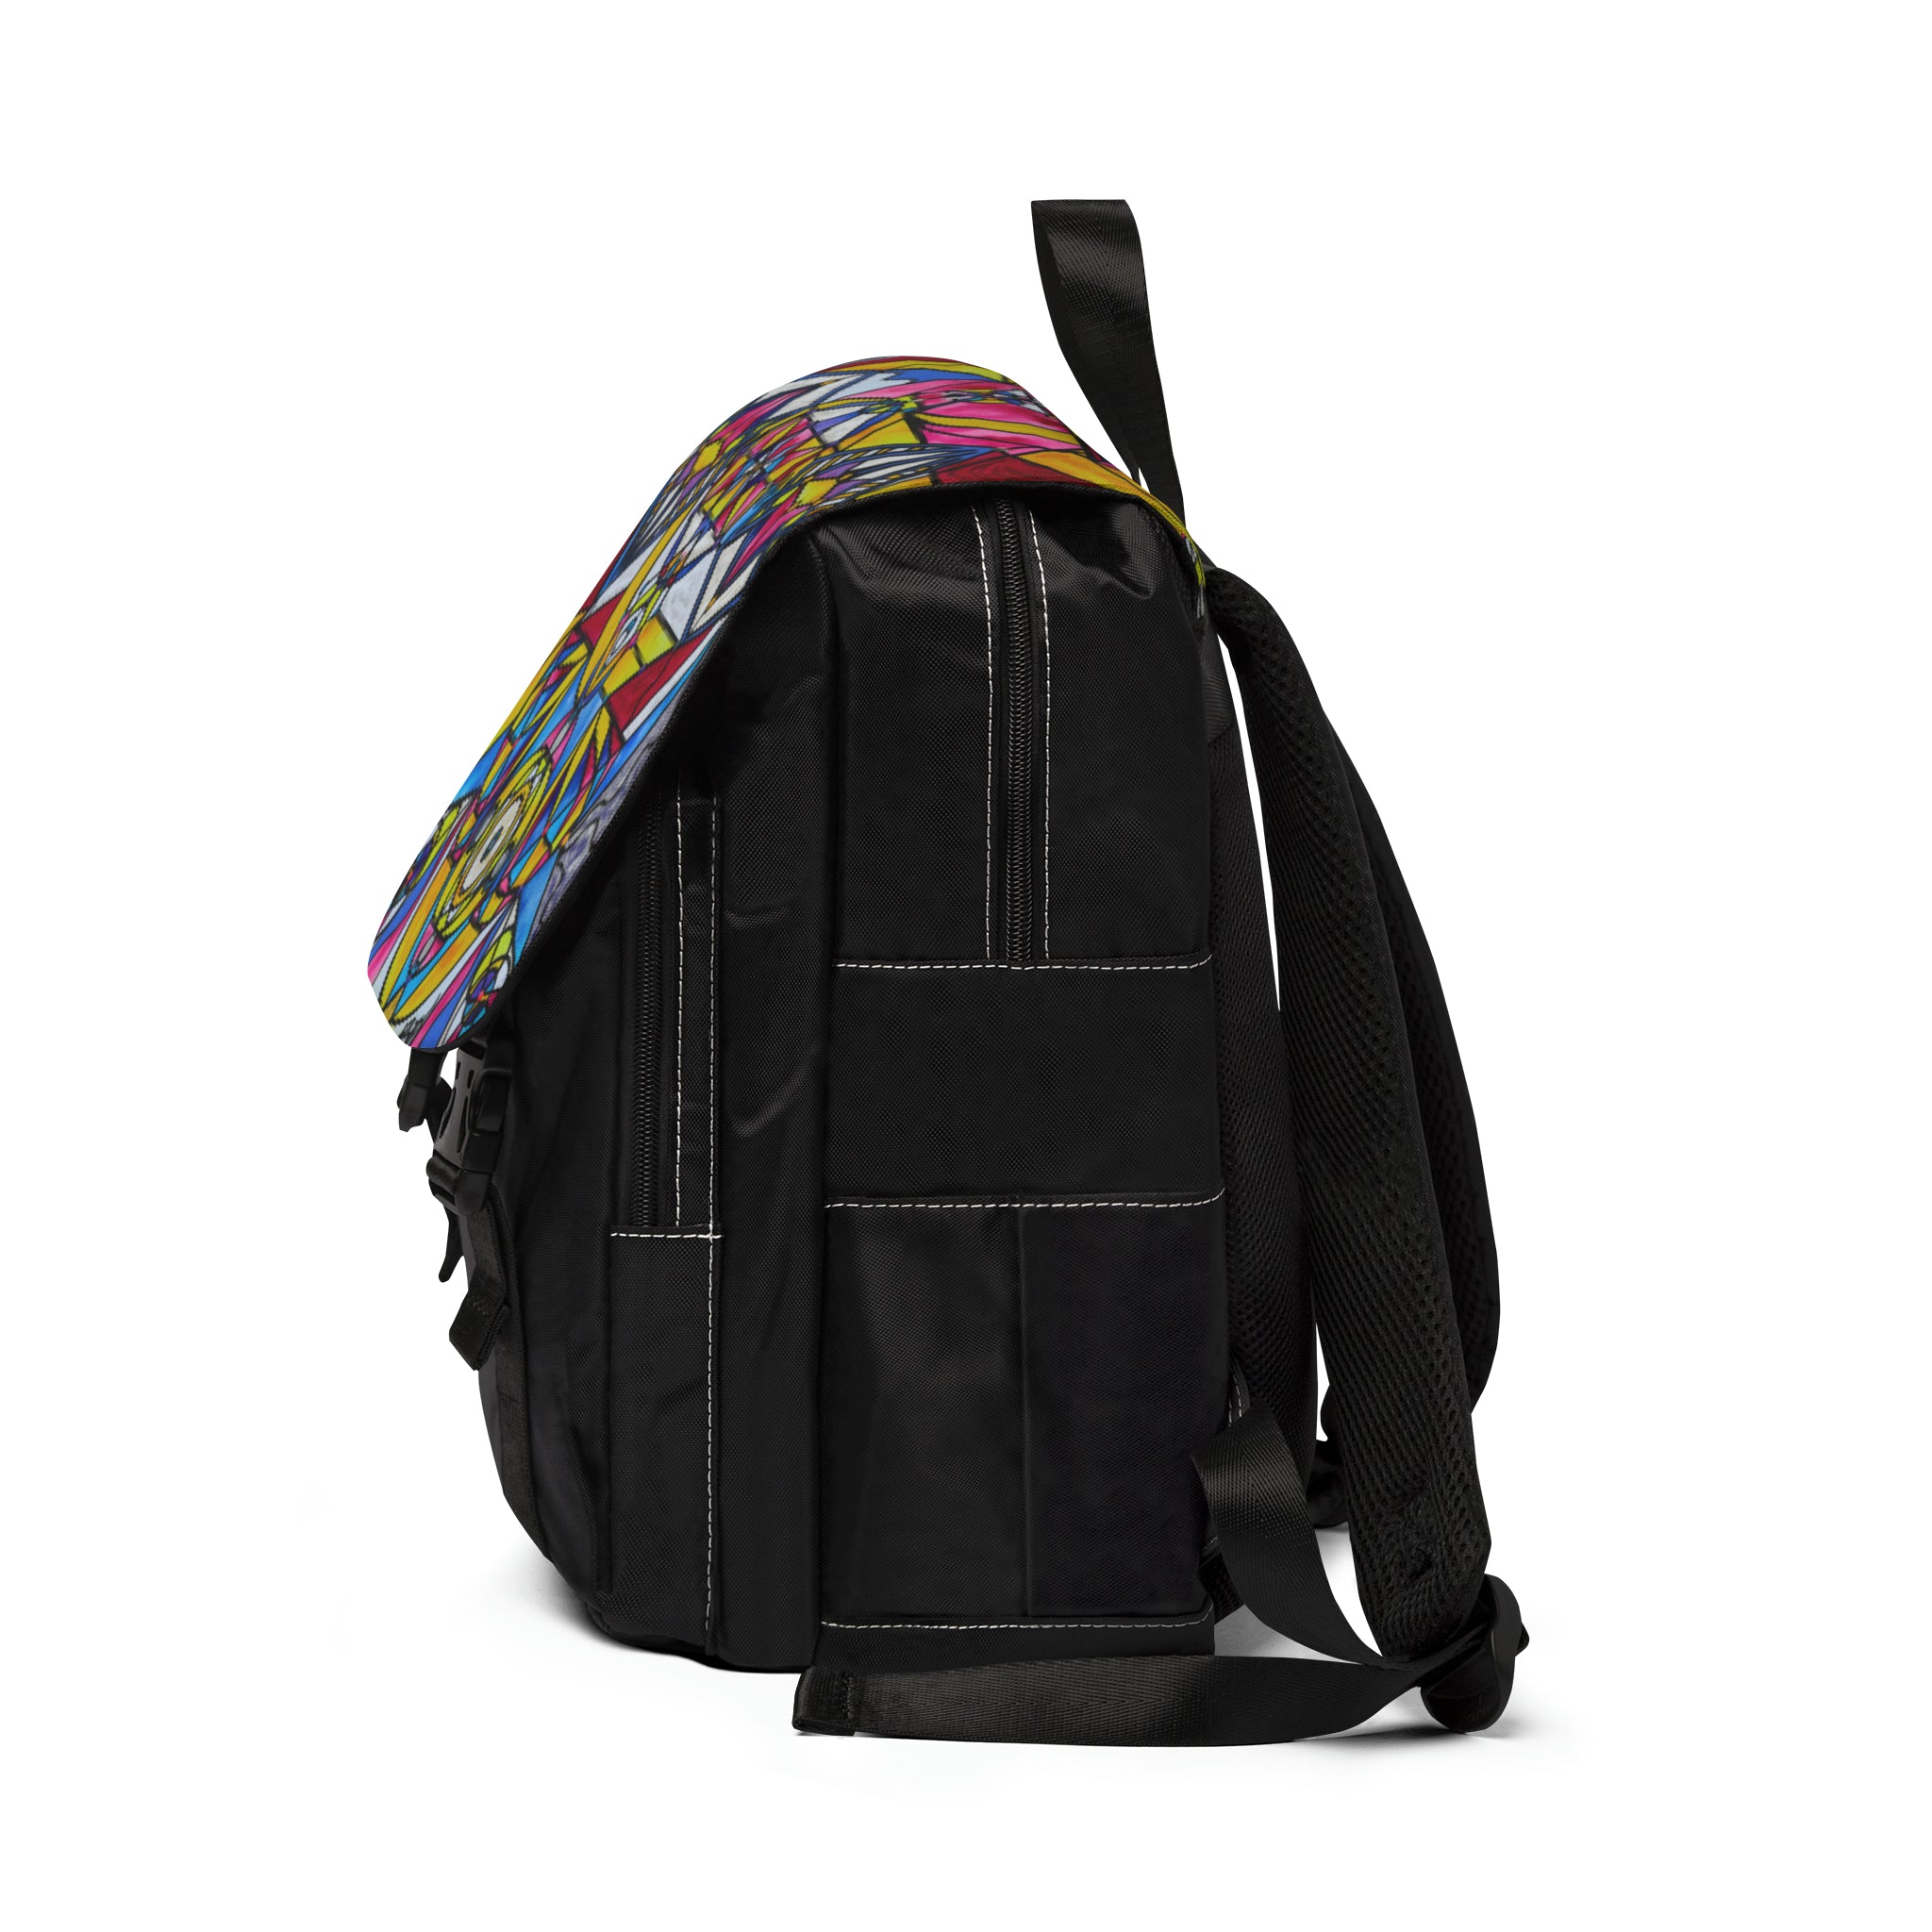 the-ultimate-online-sports-store-for-sanat-kumara-consciousness-unisex-casual-shoulder-backpack-sale_2.jpg